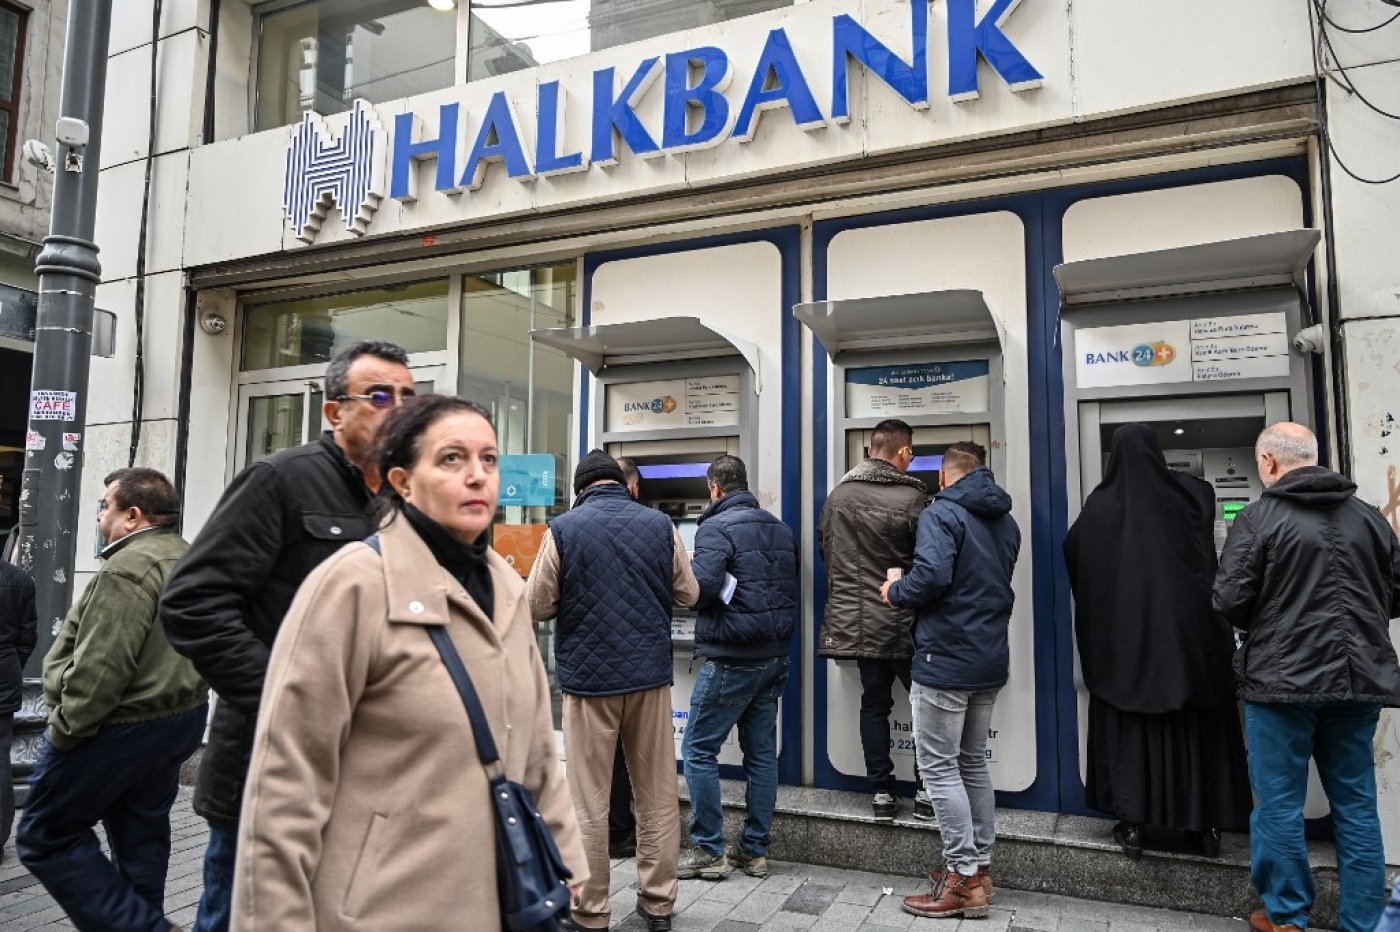 US prosecutors in October 2019 charged Halkbank with bank fraud and money laundering over an alleged scheme to evade US sanctions on Iran.